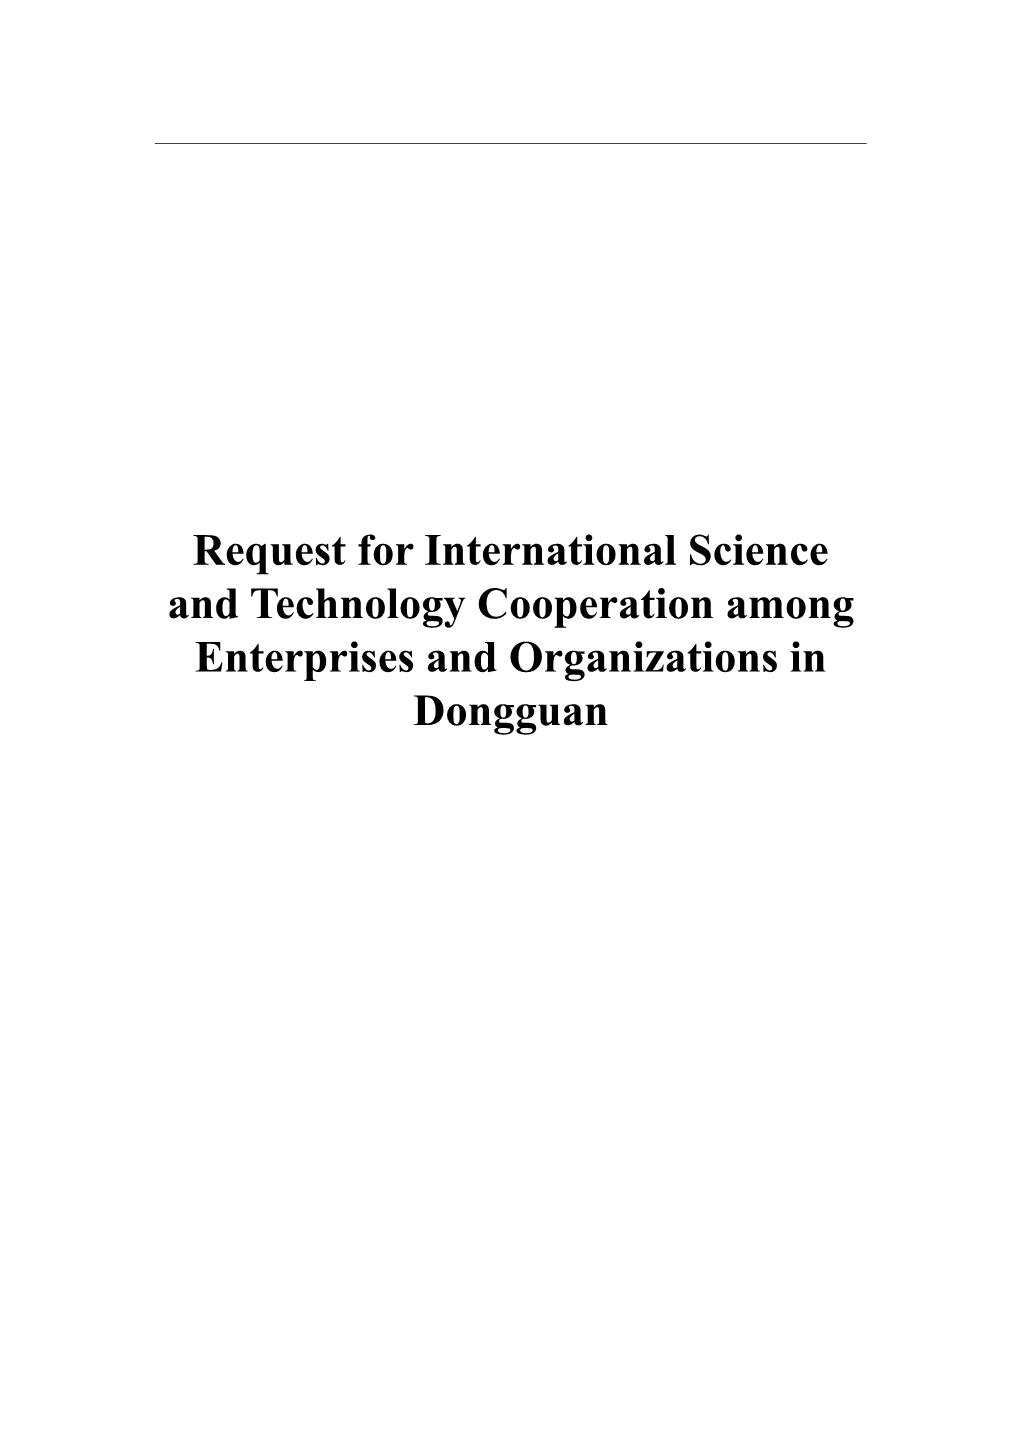 Request Form for International Science and Technology Cooperation